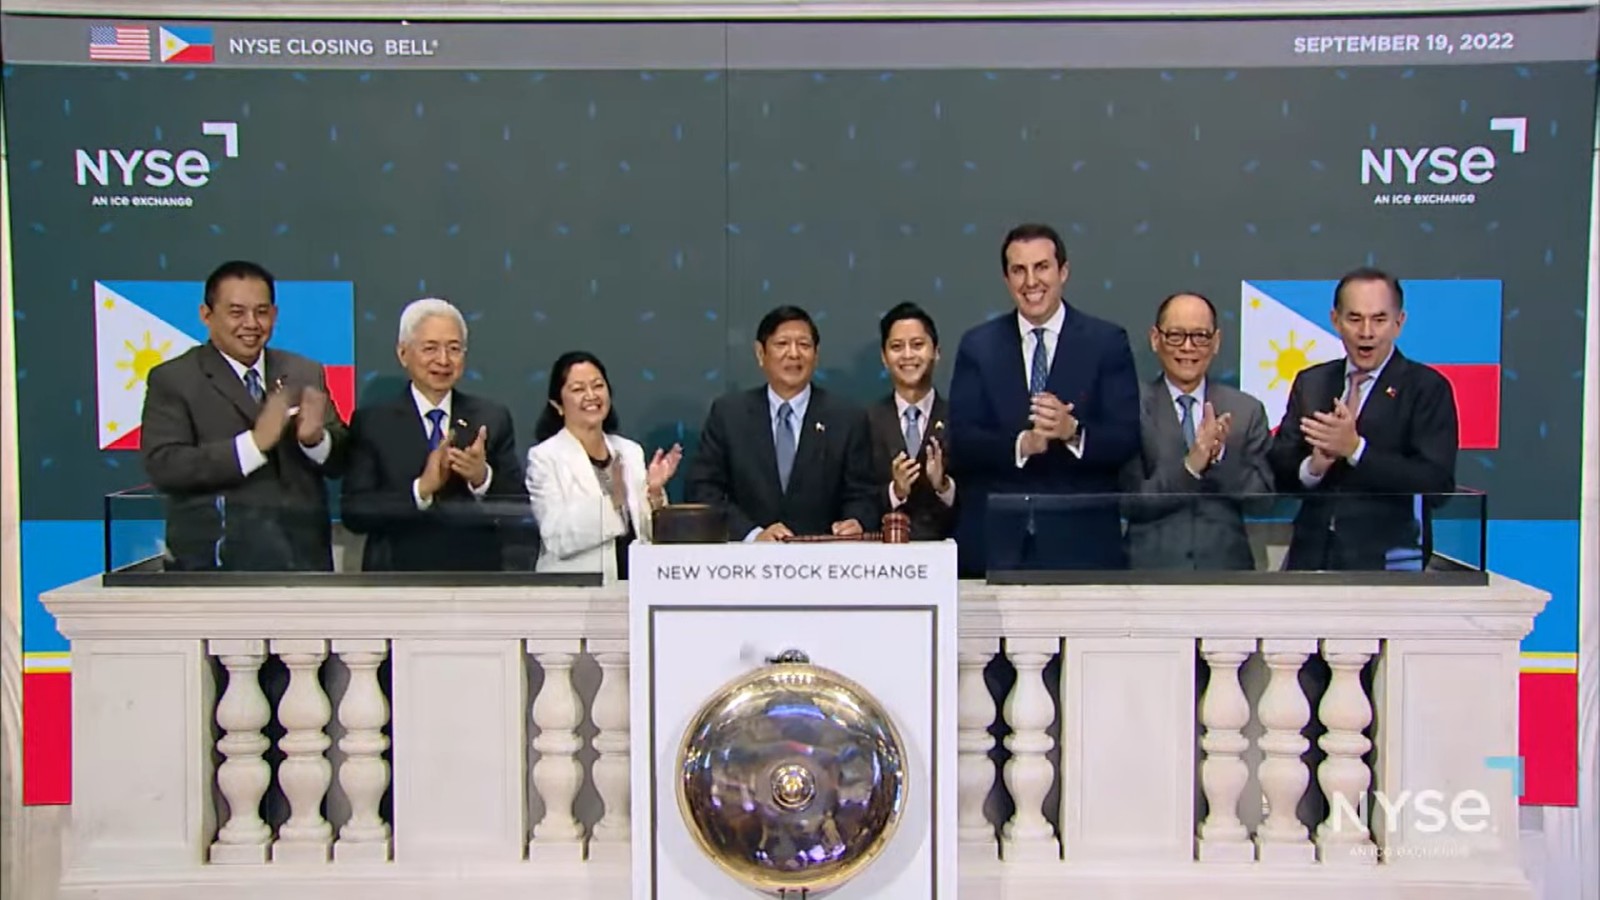 PBBM rings the closing bell at the NYSE after attending an economic forum